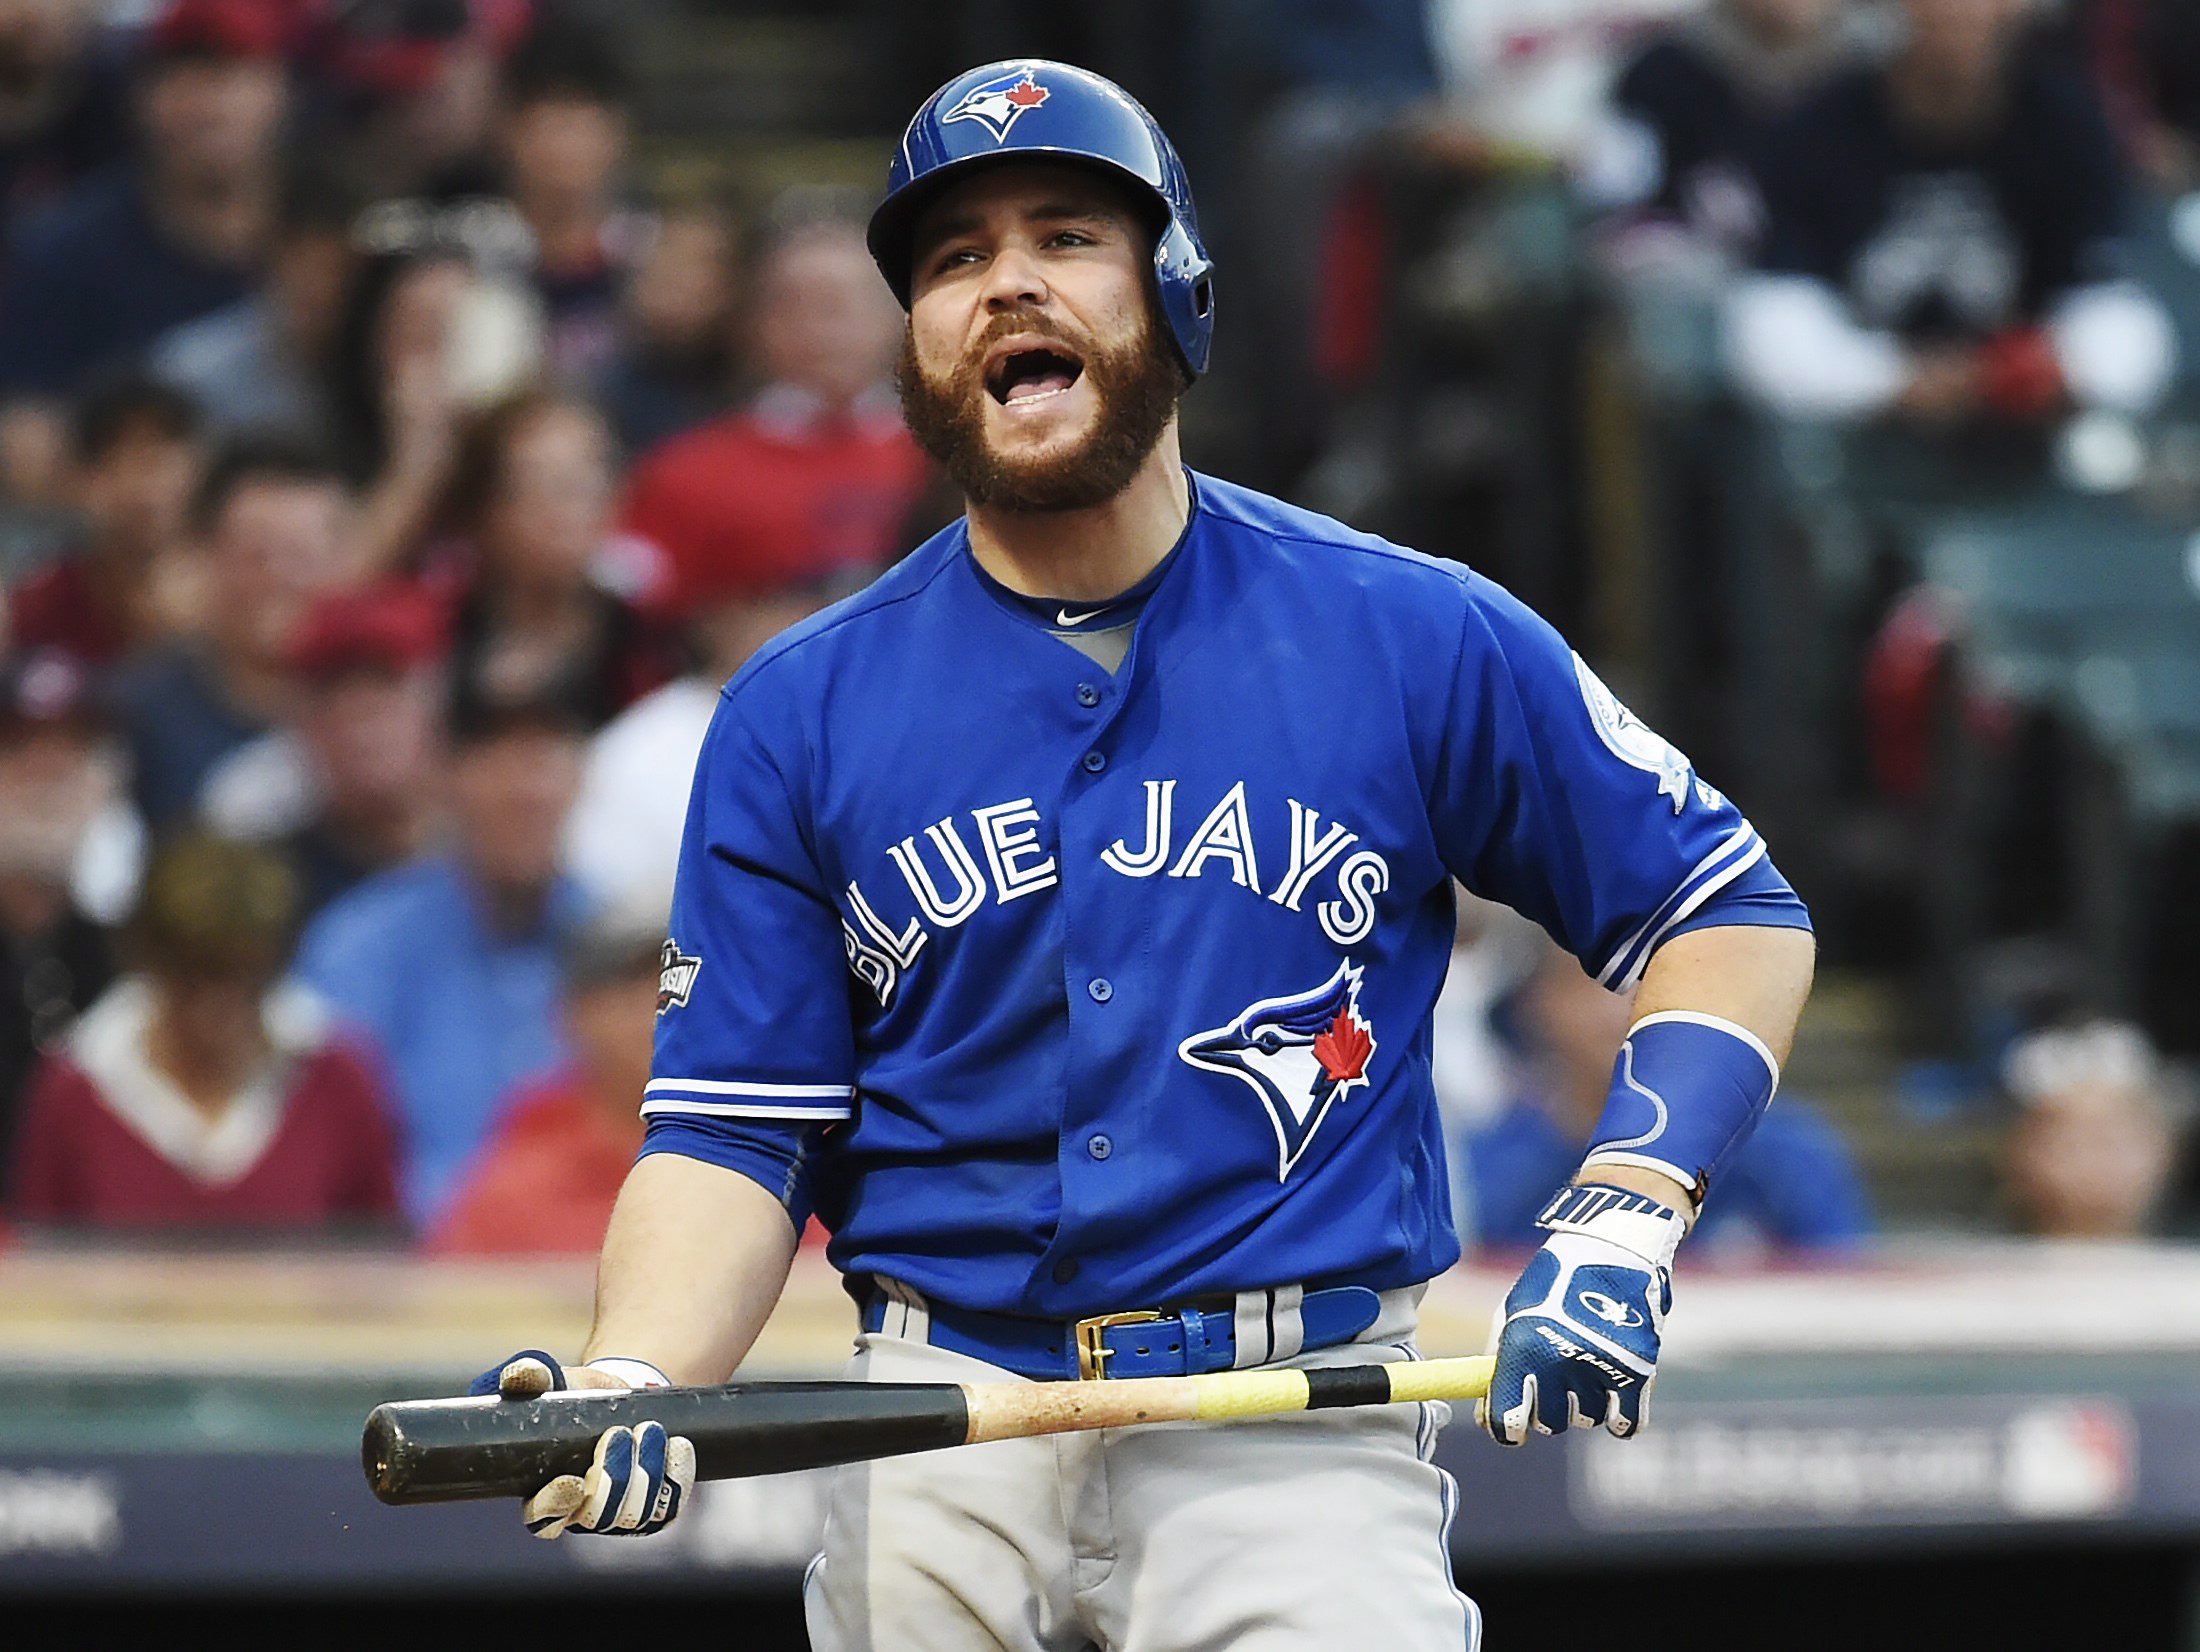 Toronto Blue Jays catcher Russell Martin (55) reacts at home plate against the Cleveland Indians during seventh inning, game two American League Championship Series baseball action in Cleveland on Saturday, October 15, 2016. THE CANADIAN PRESS/Nathan Denette